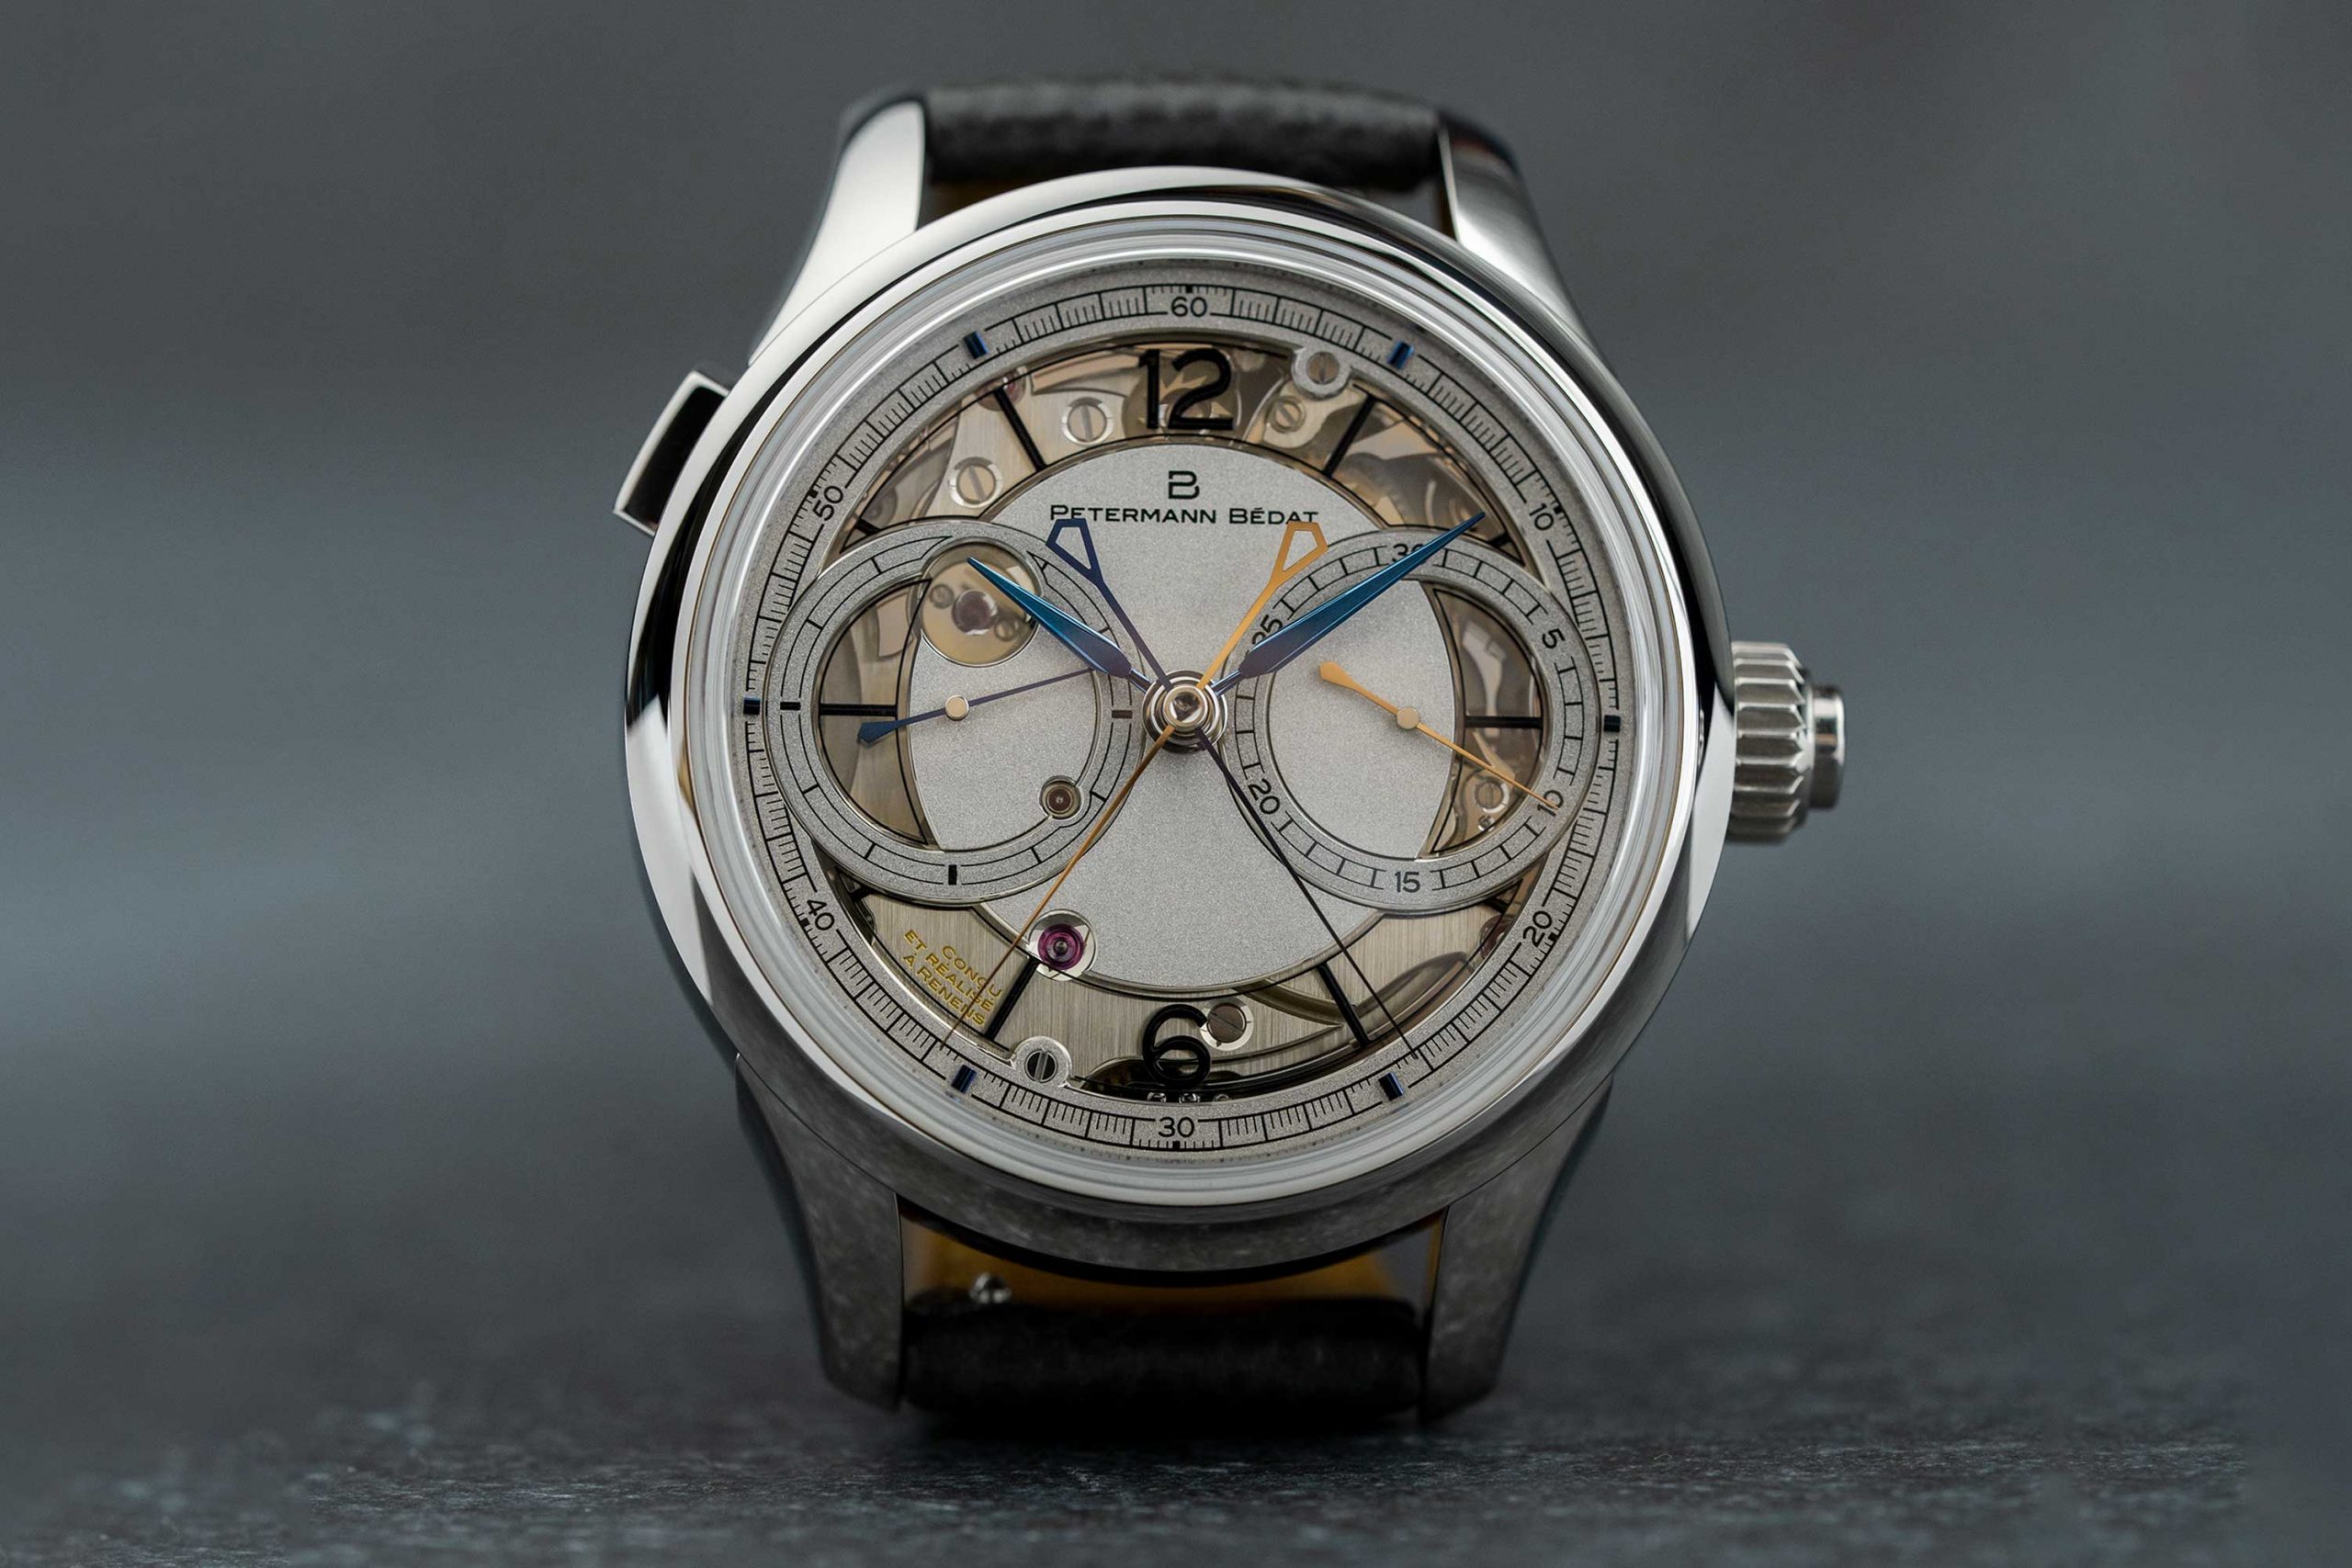 Petermann Bedat Monopusher Split-Seconds Chronograph with Instantaneous Minutes Ref. 2941